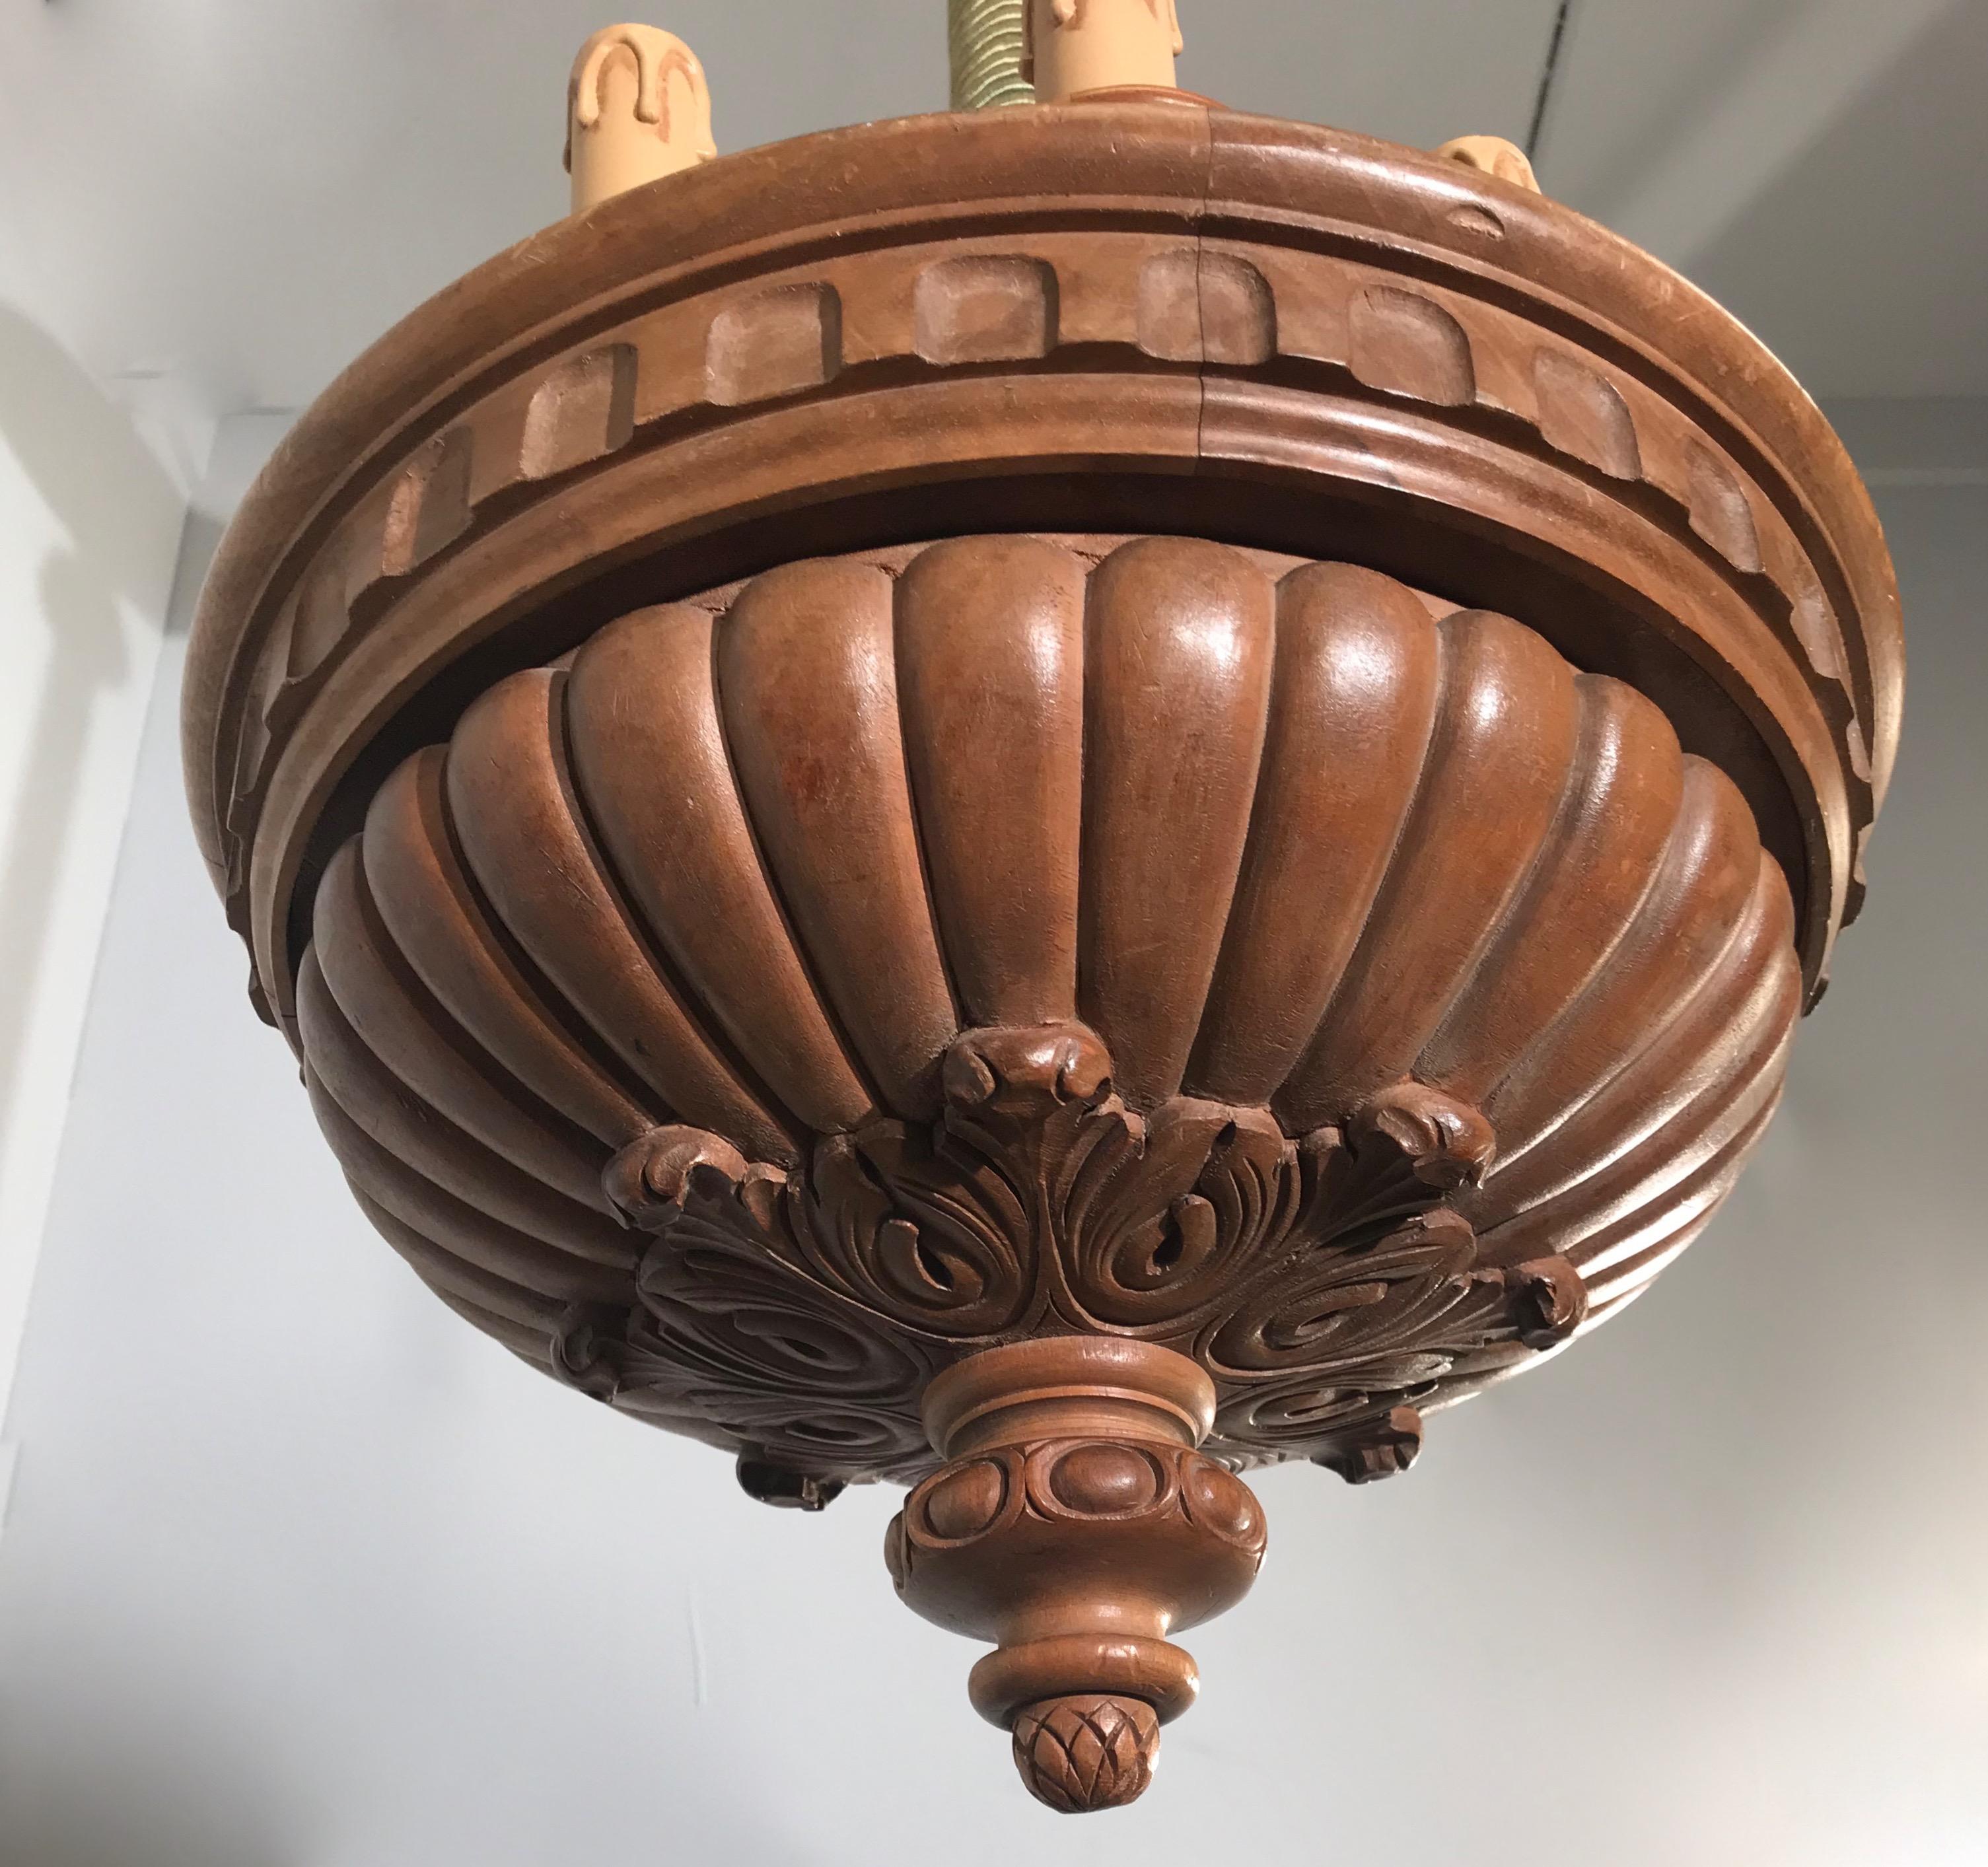 Hand-Crafted Rare and Decorative Early 1900s Eight-Light Quality Carved Nutwood Pendant Light For Sale